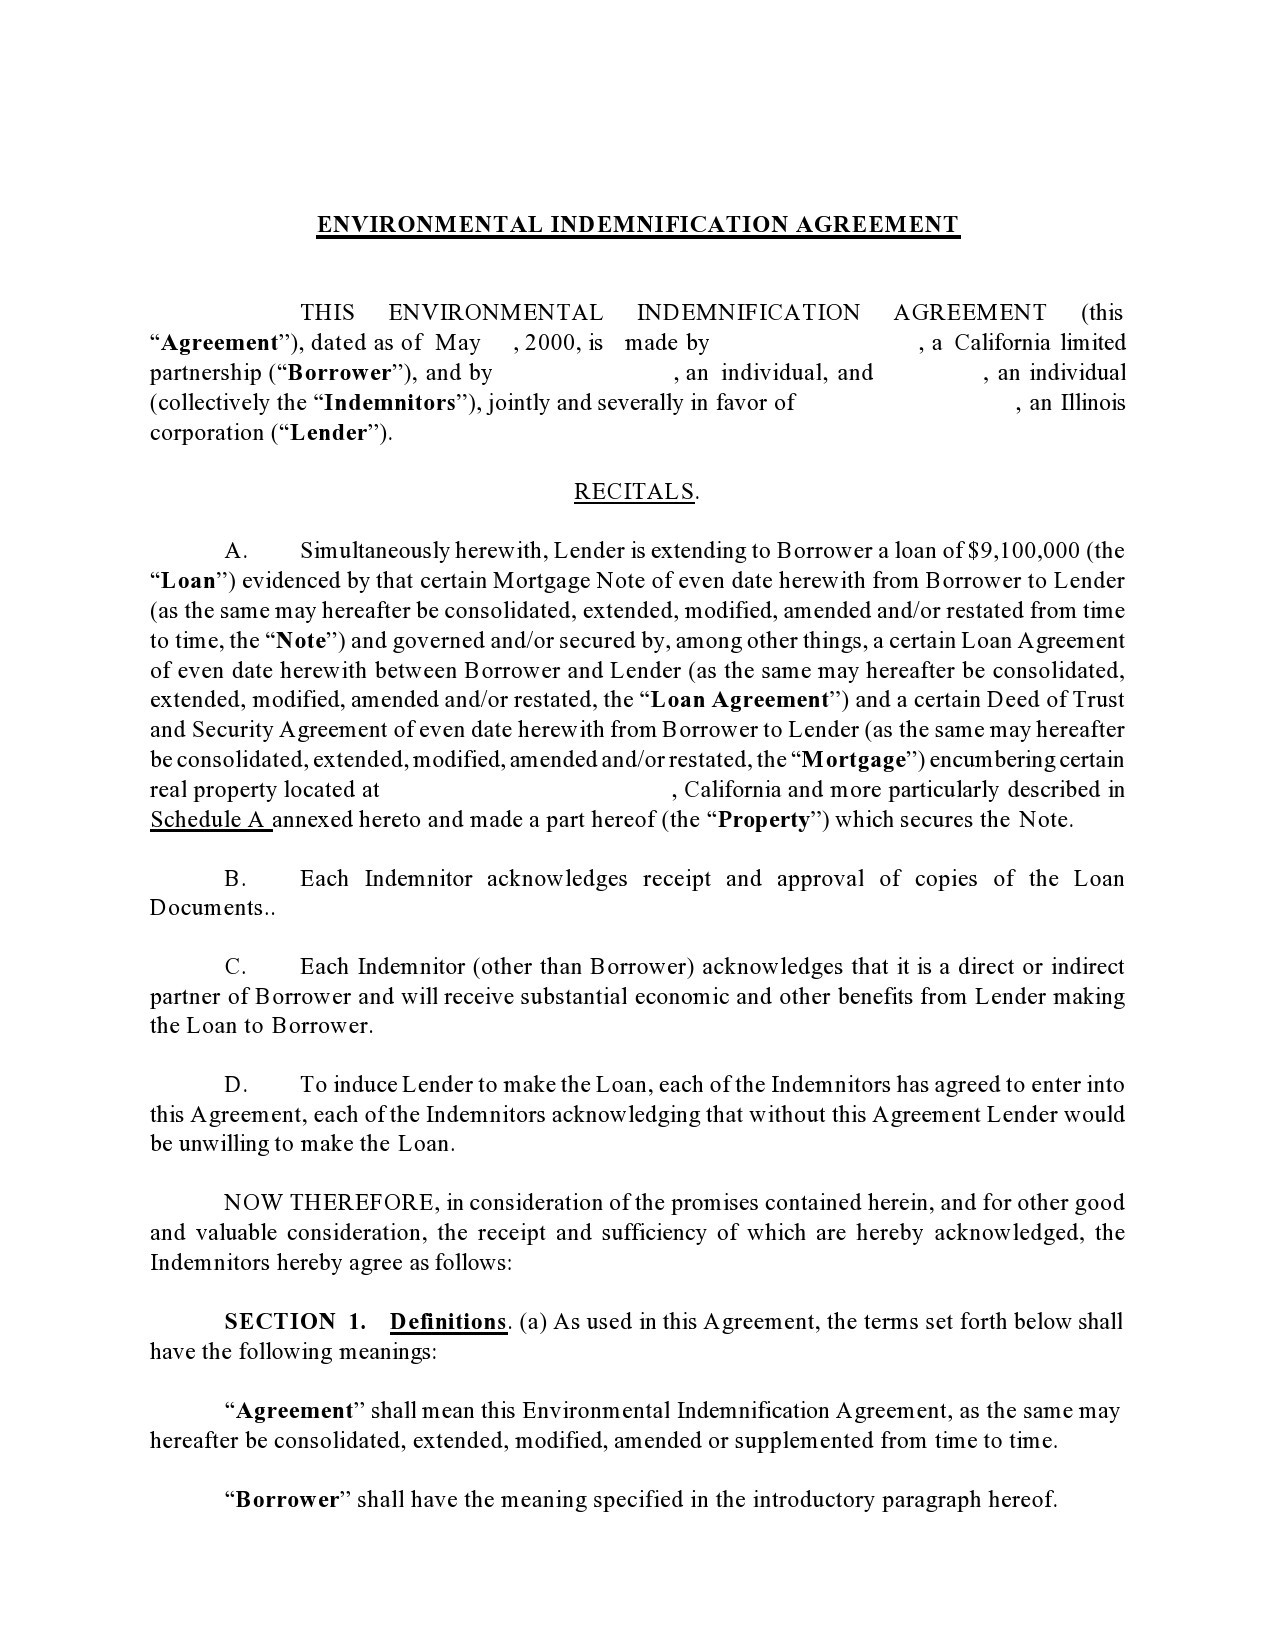 Free indemnification agreement 11